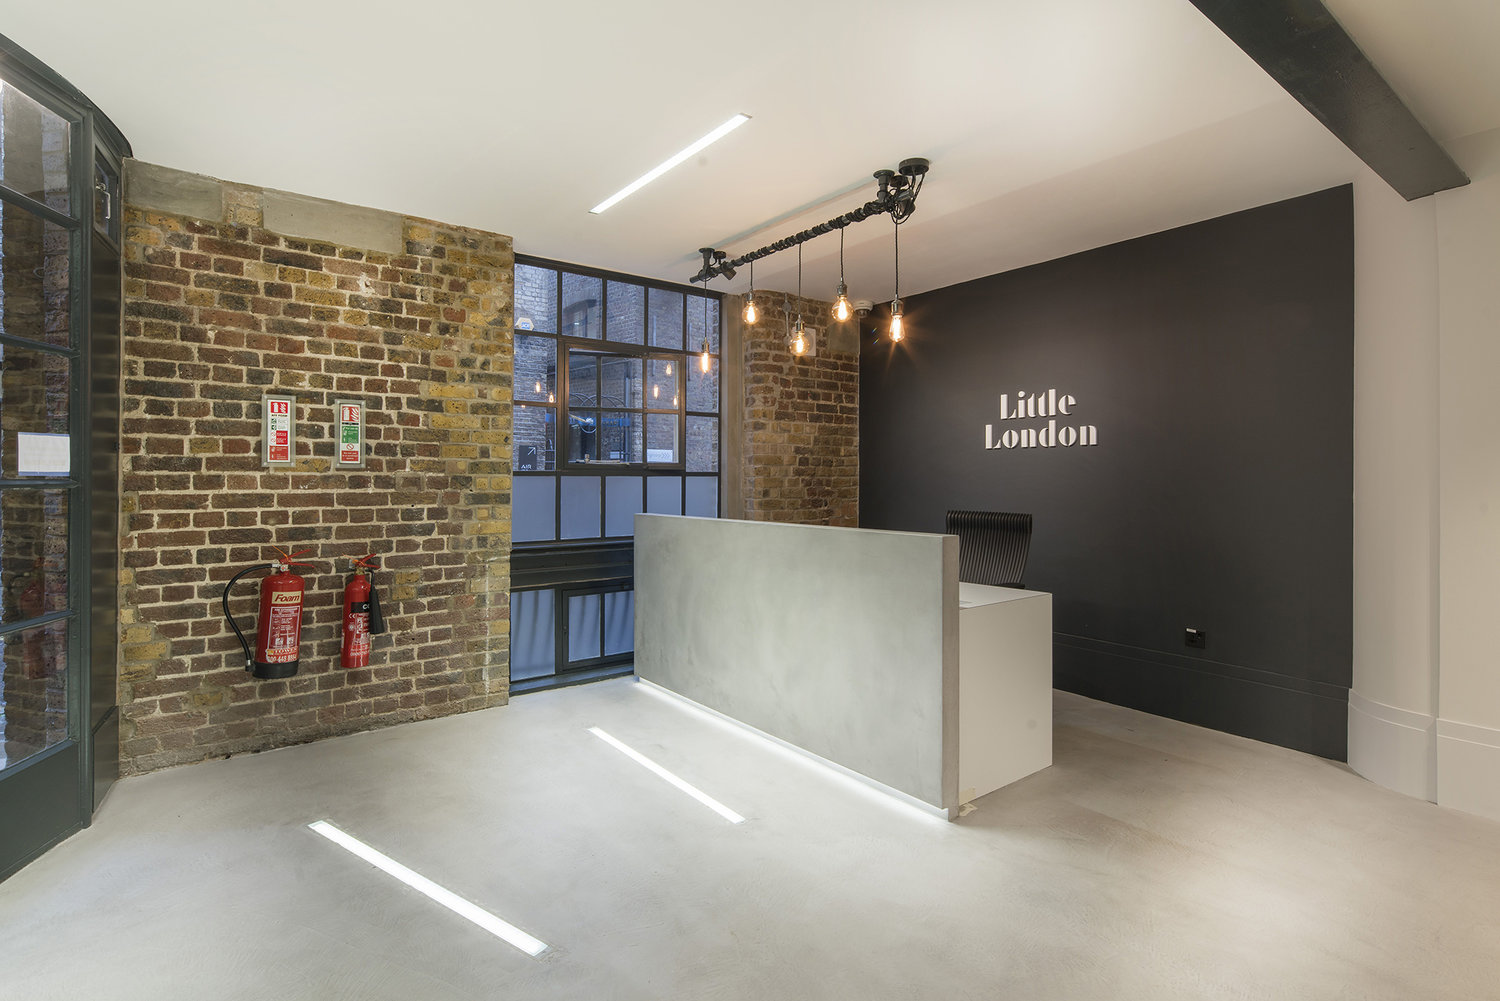 Lighting for an industrial style CAT A fitout at Little London, London.